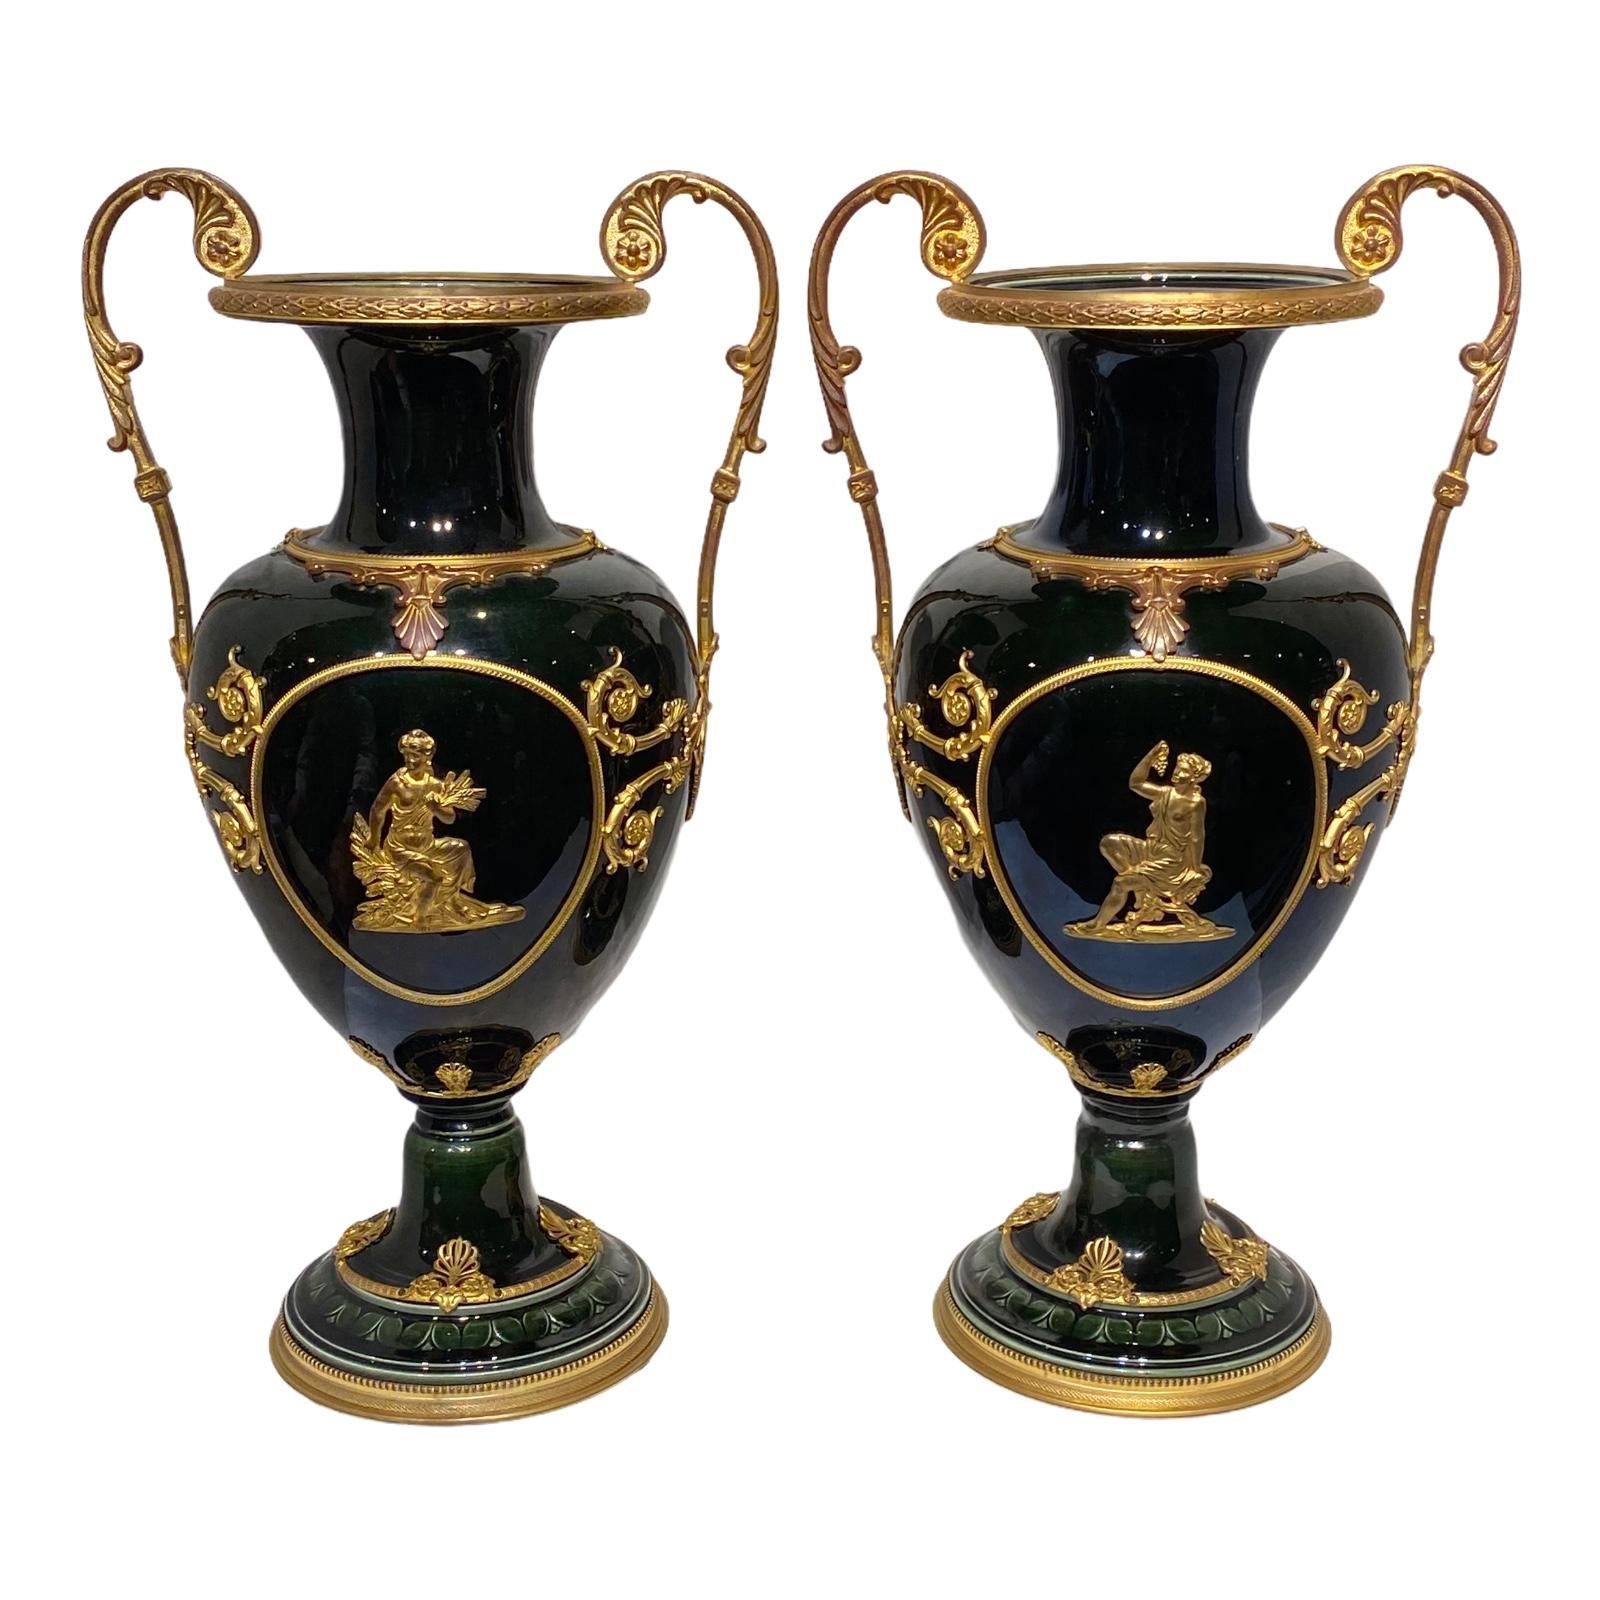 Ceramic Iridescent Glazed Faience Vases with Neoclassical Gilt Bronze Mounts For Sale